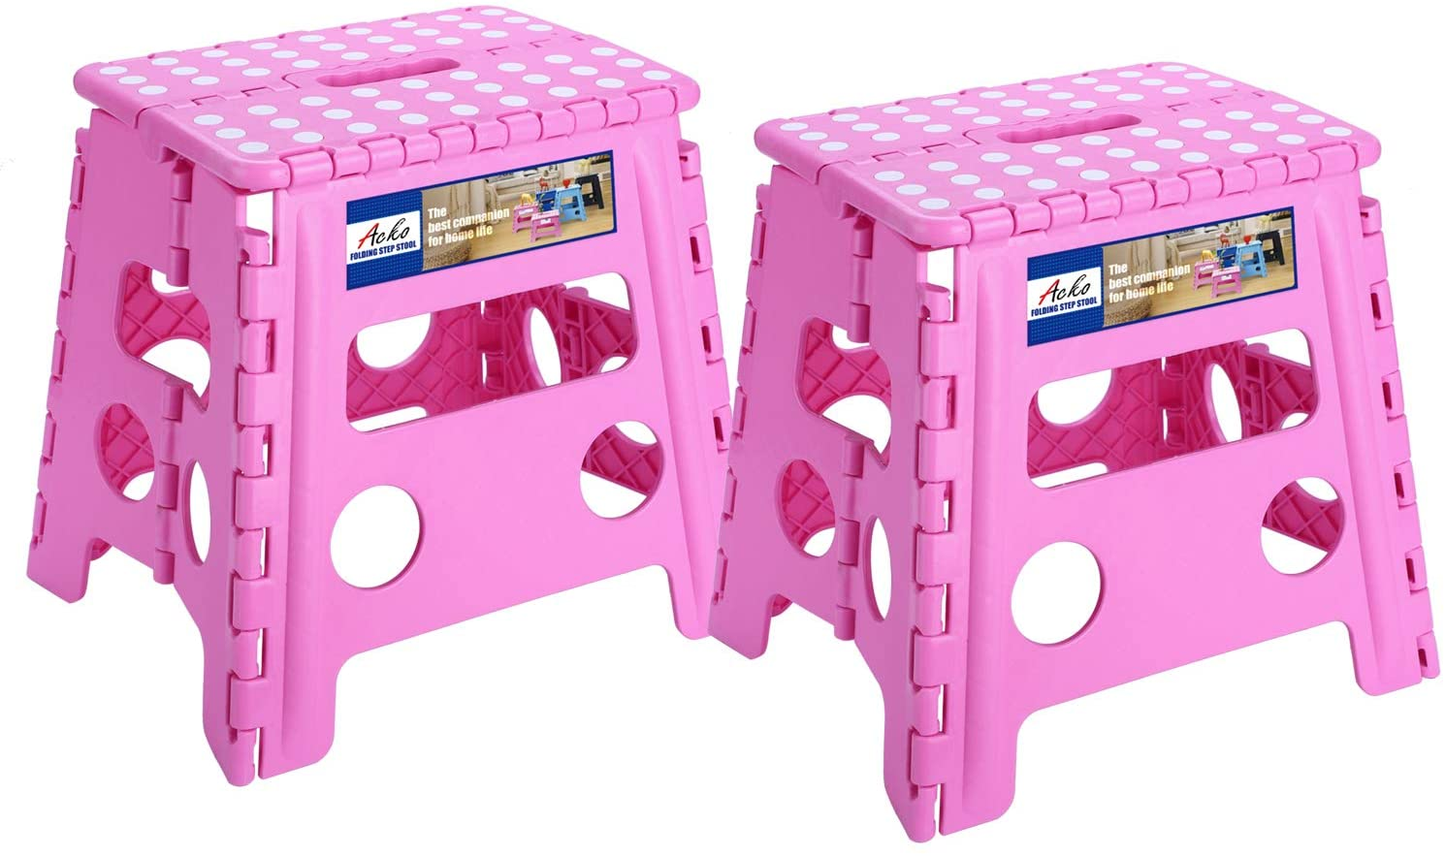 2 Pack 11 Inch Folding Step Stool Lightweight Plastic 9Inch Step Stool, Foldable Step Stool,Non Slip Folding Stools for Kids & Adults, Kitchen Bathroom Bedroom